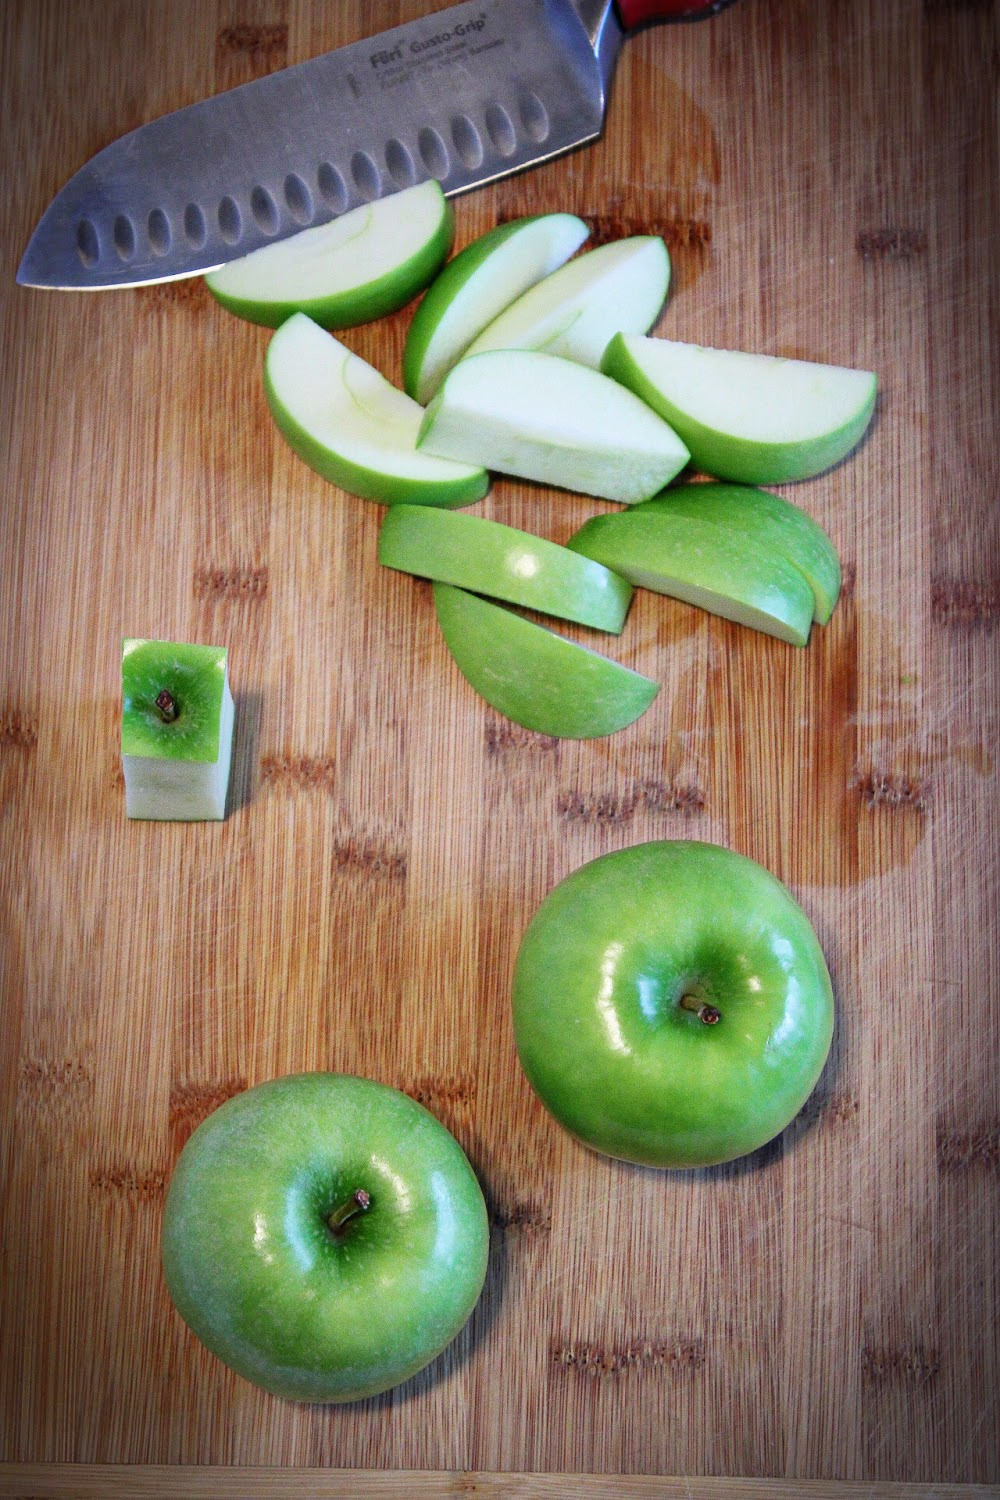 Whole apples and slice green apples on a cutting board.